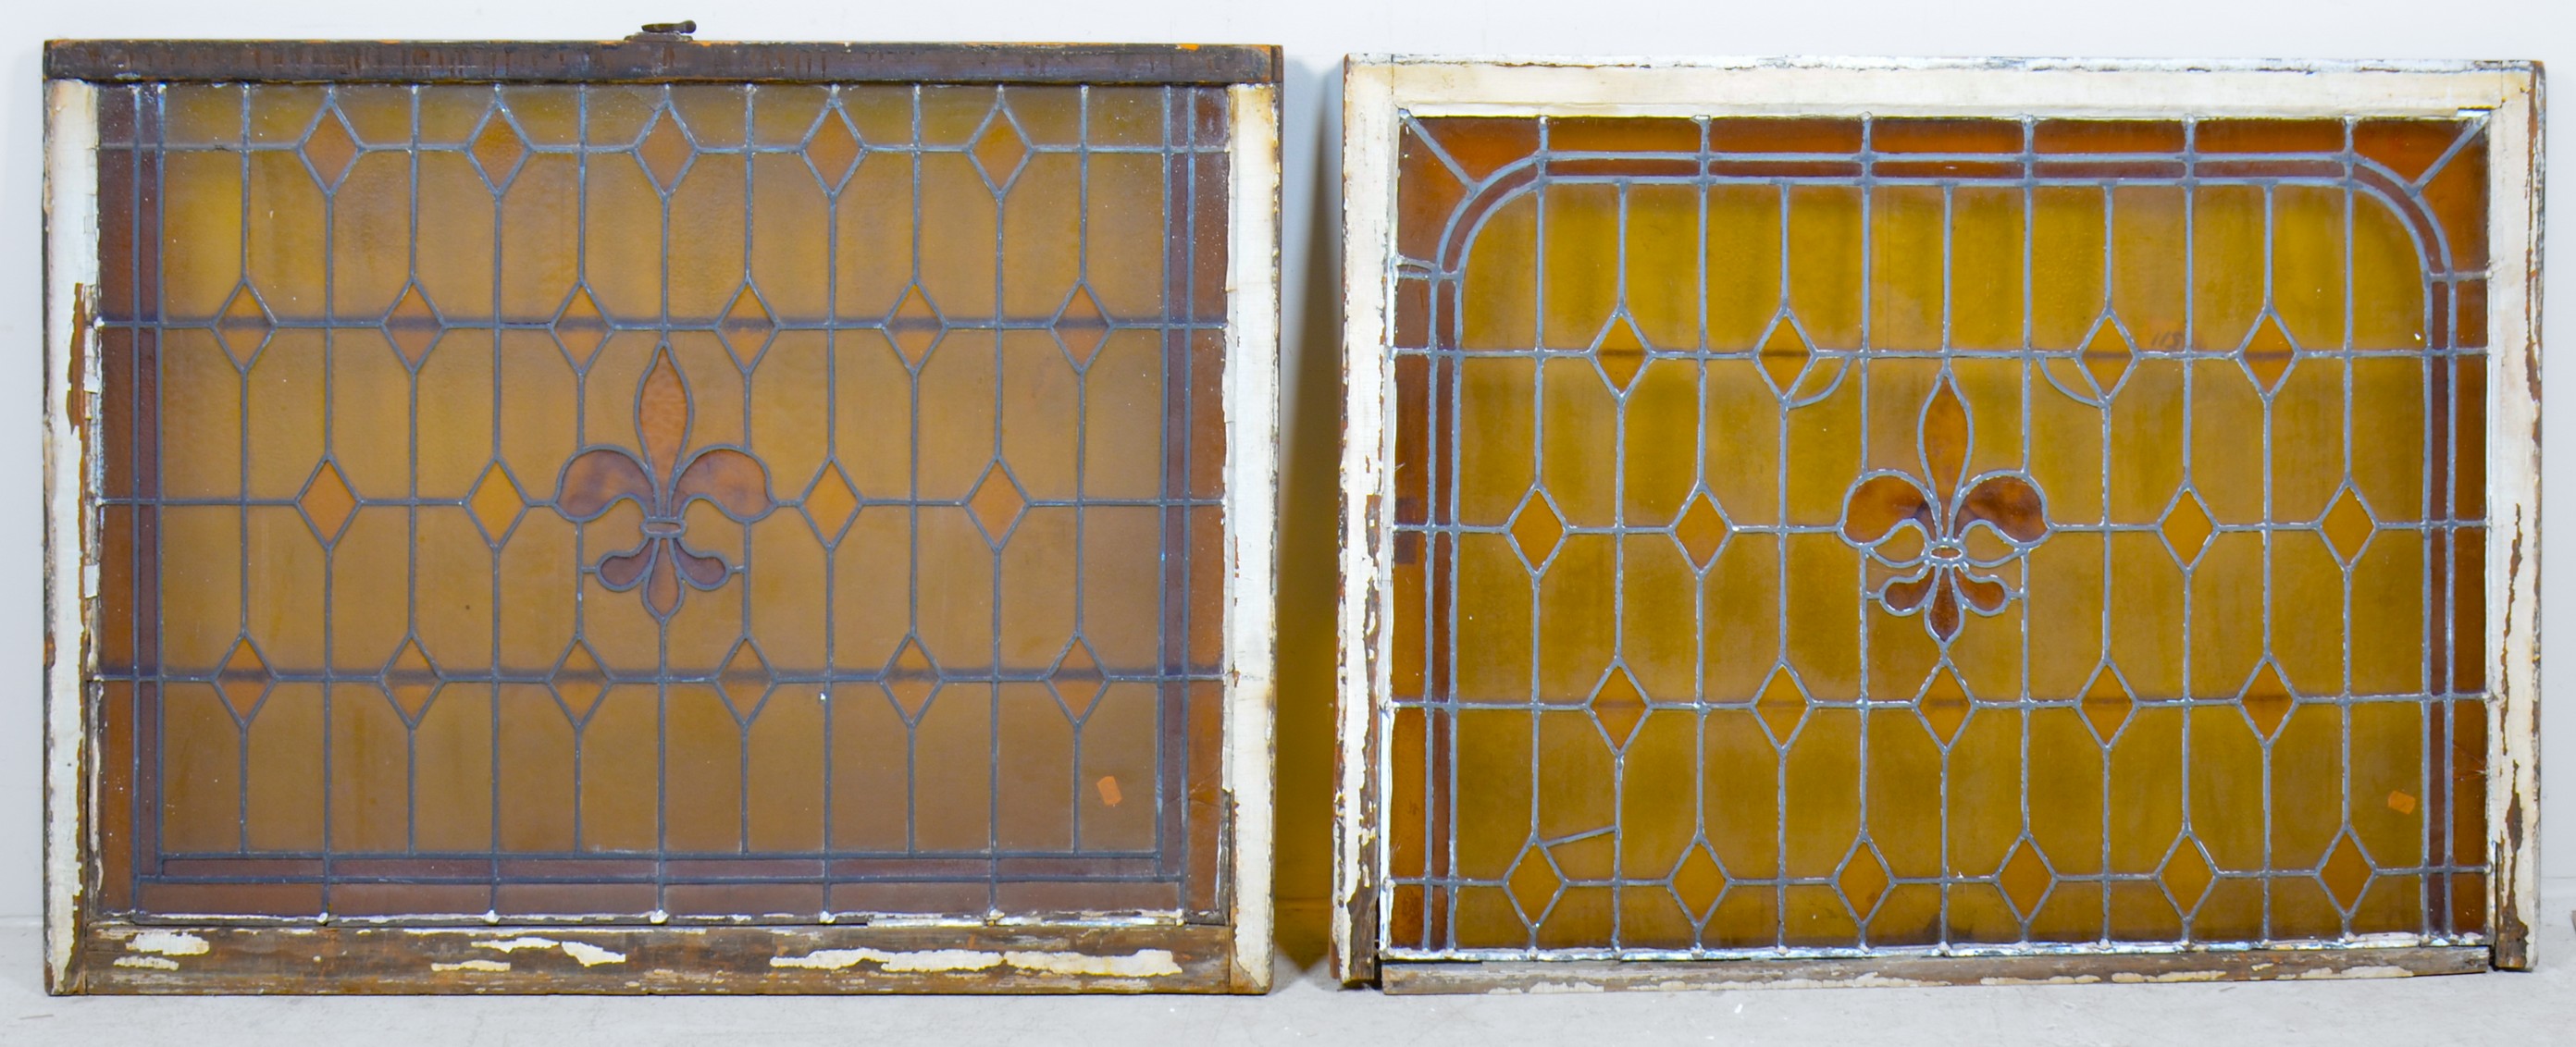 (2) Stained glass windows, white